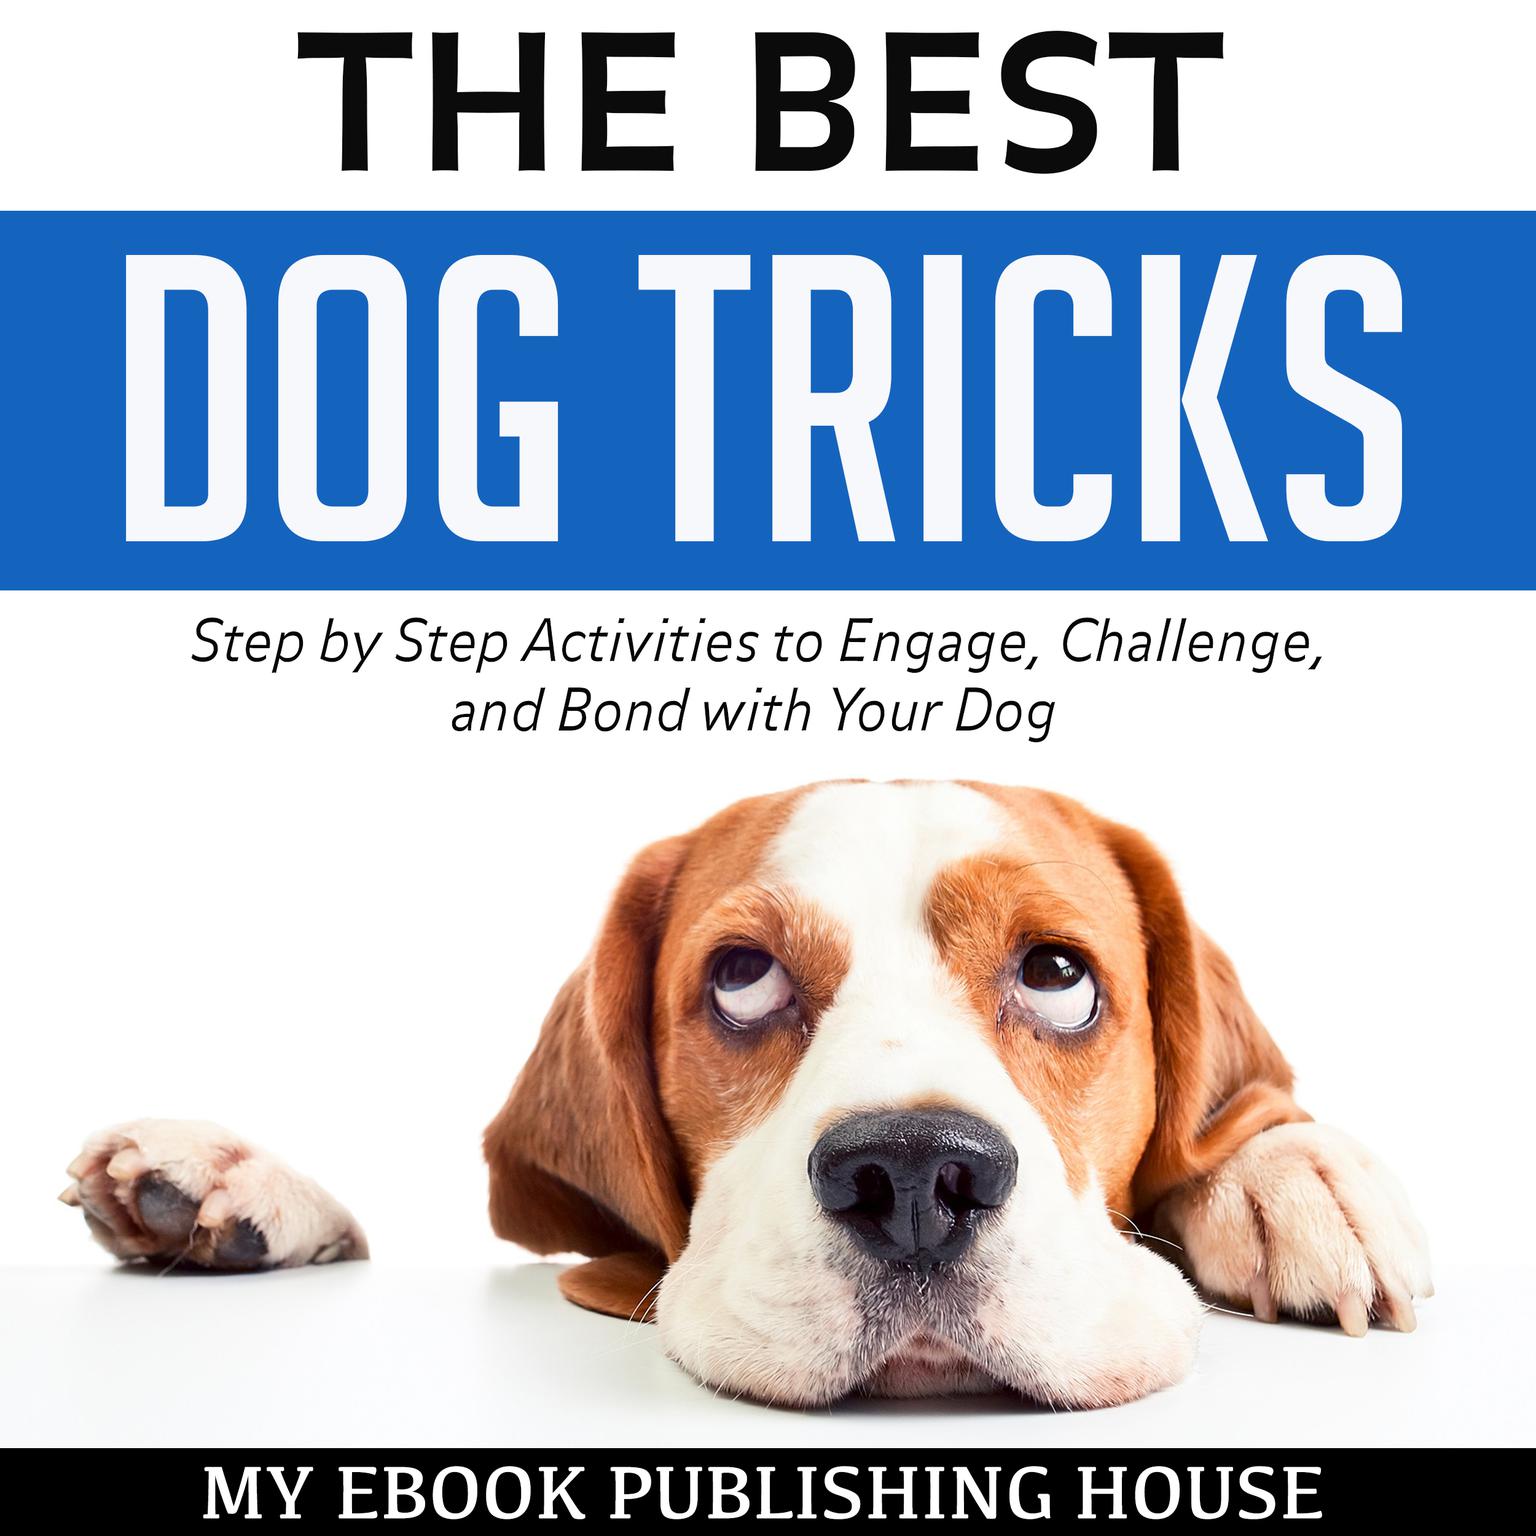 The Best Dog Tricks: Step by Step Activities to Engage, Challenge, and Bond with Your Dog Audiobook, by My Ebook Publishing House